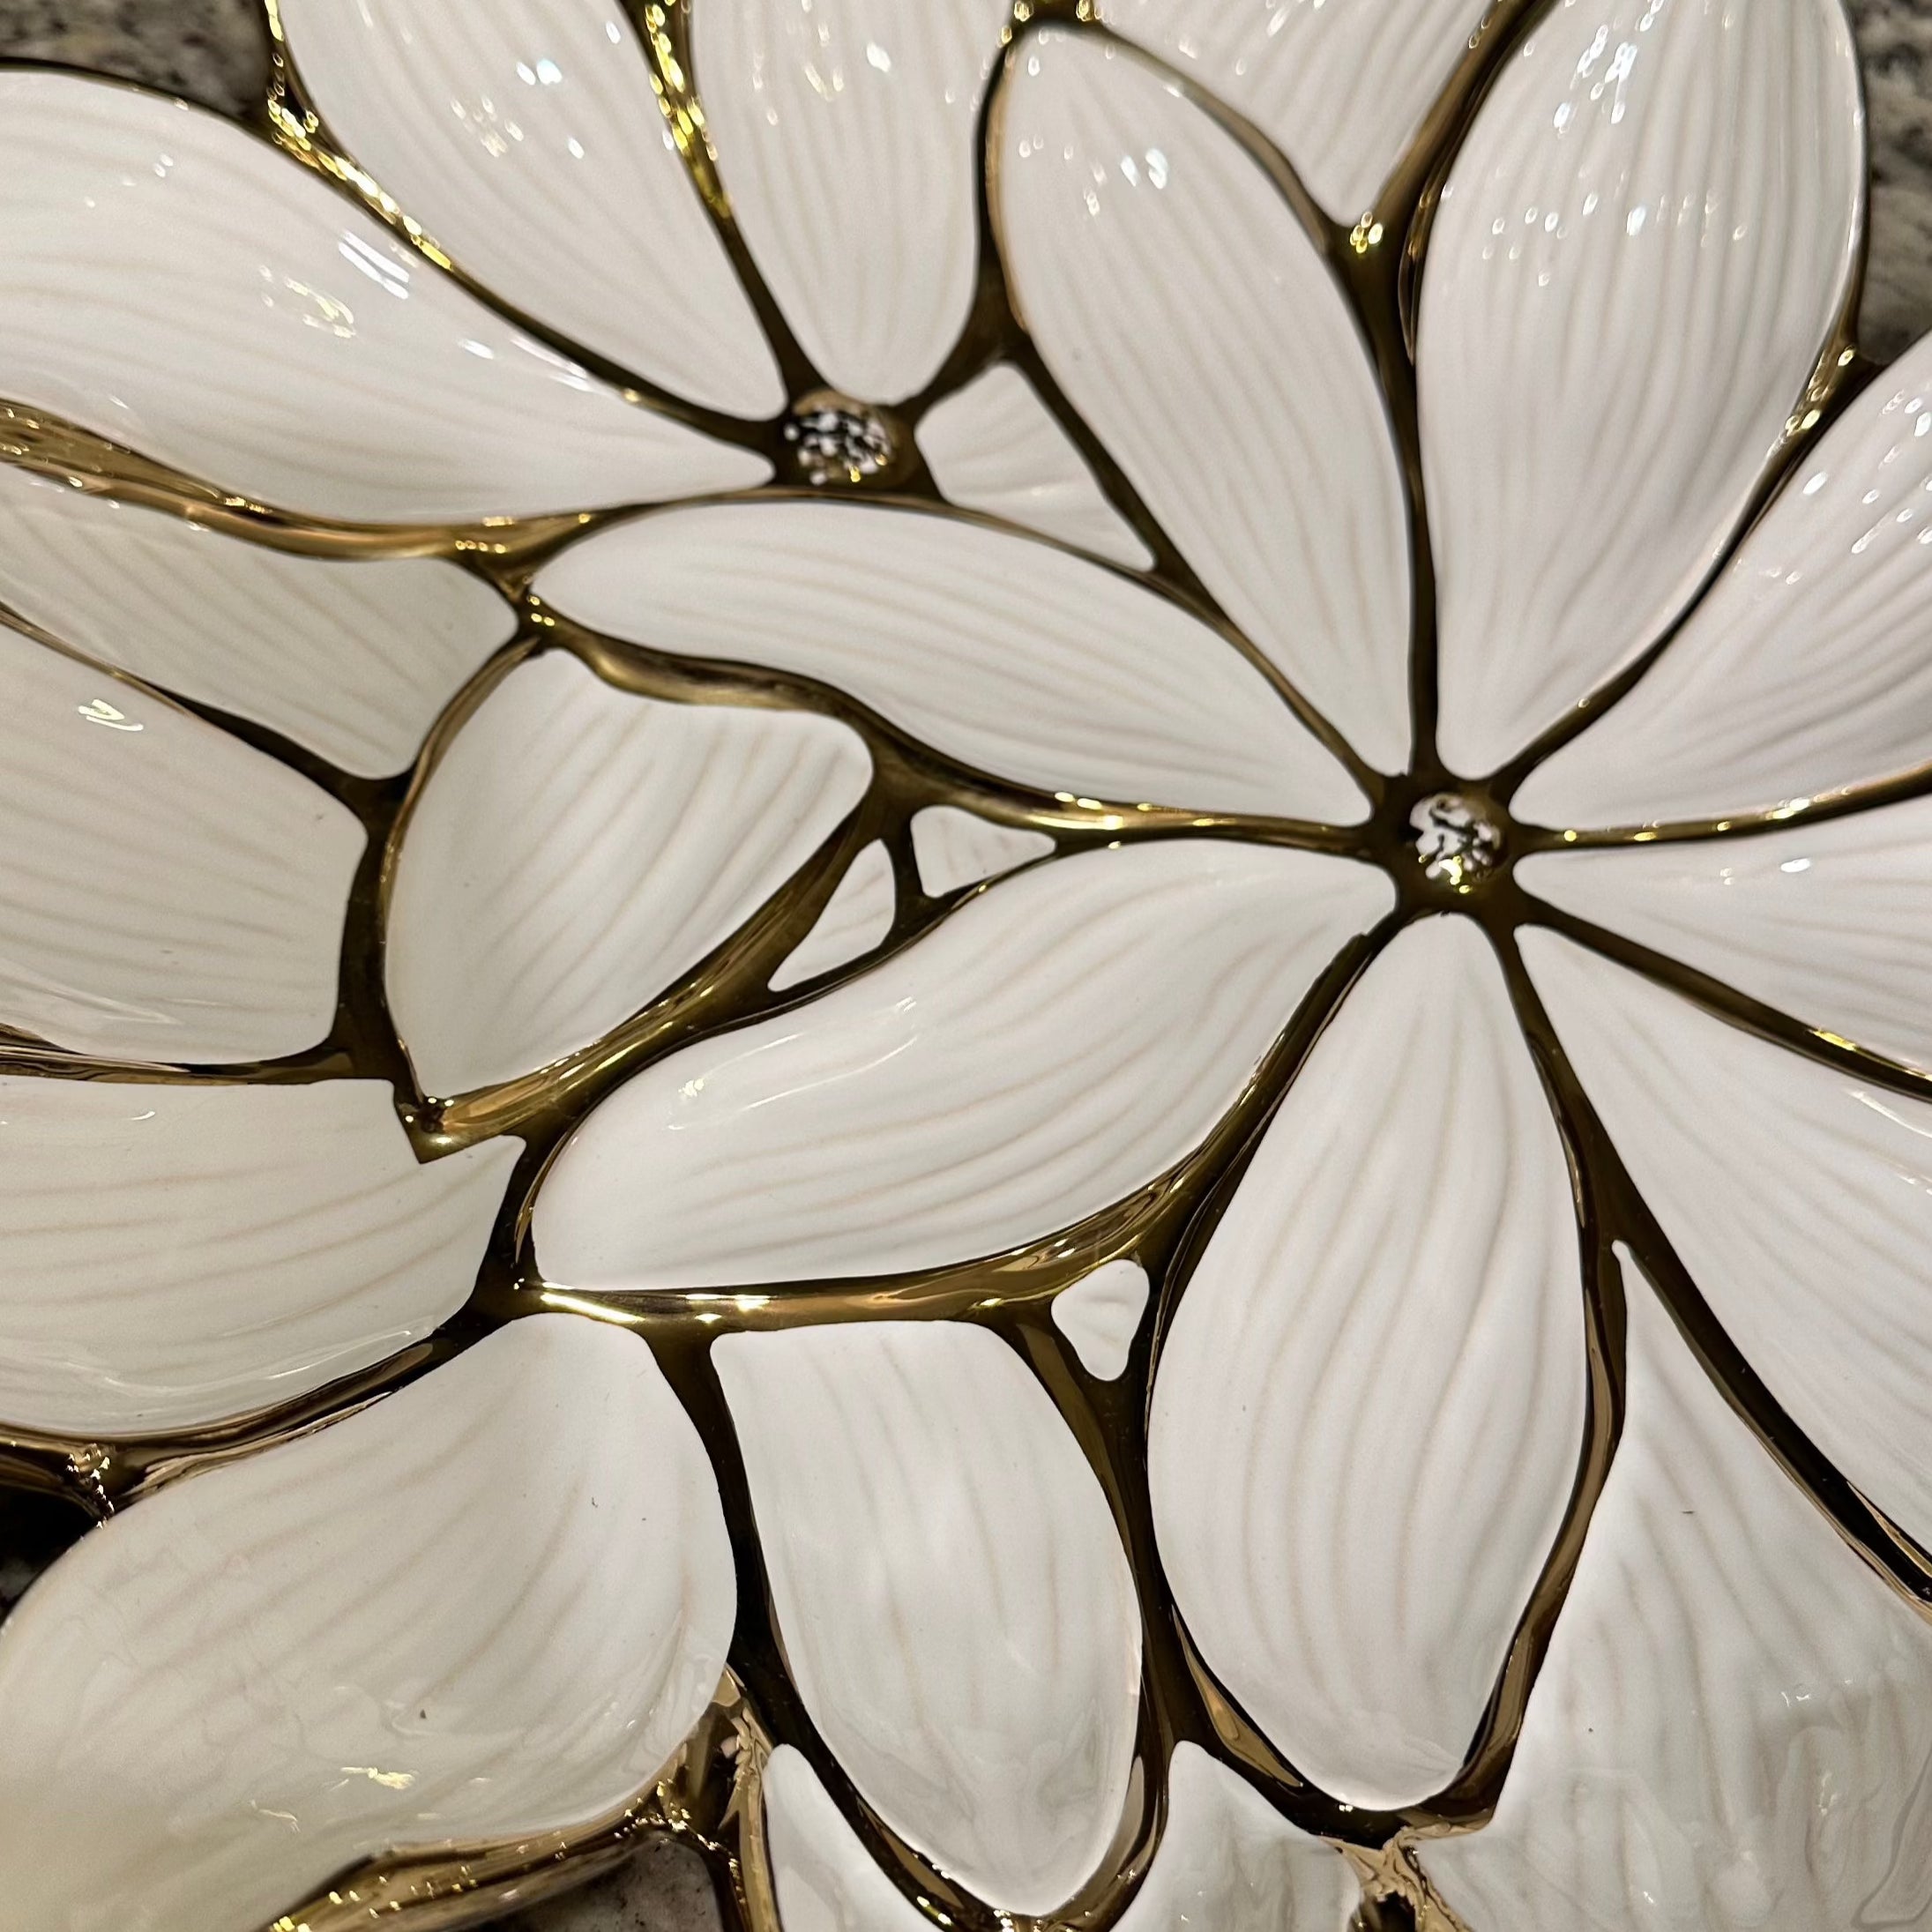 White Porcelain Flower Plate with Gold Edge (11.75")